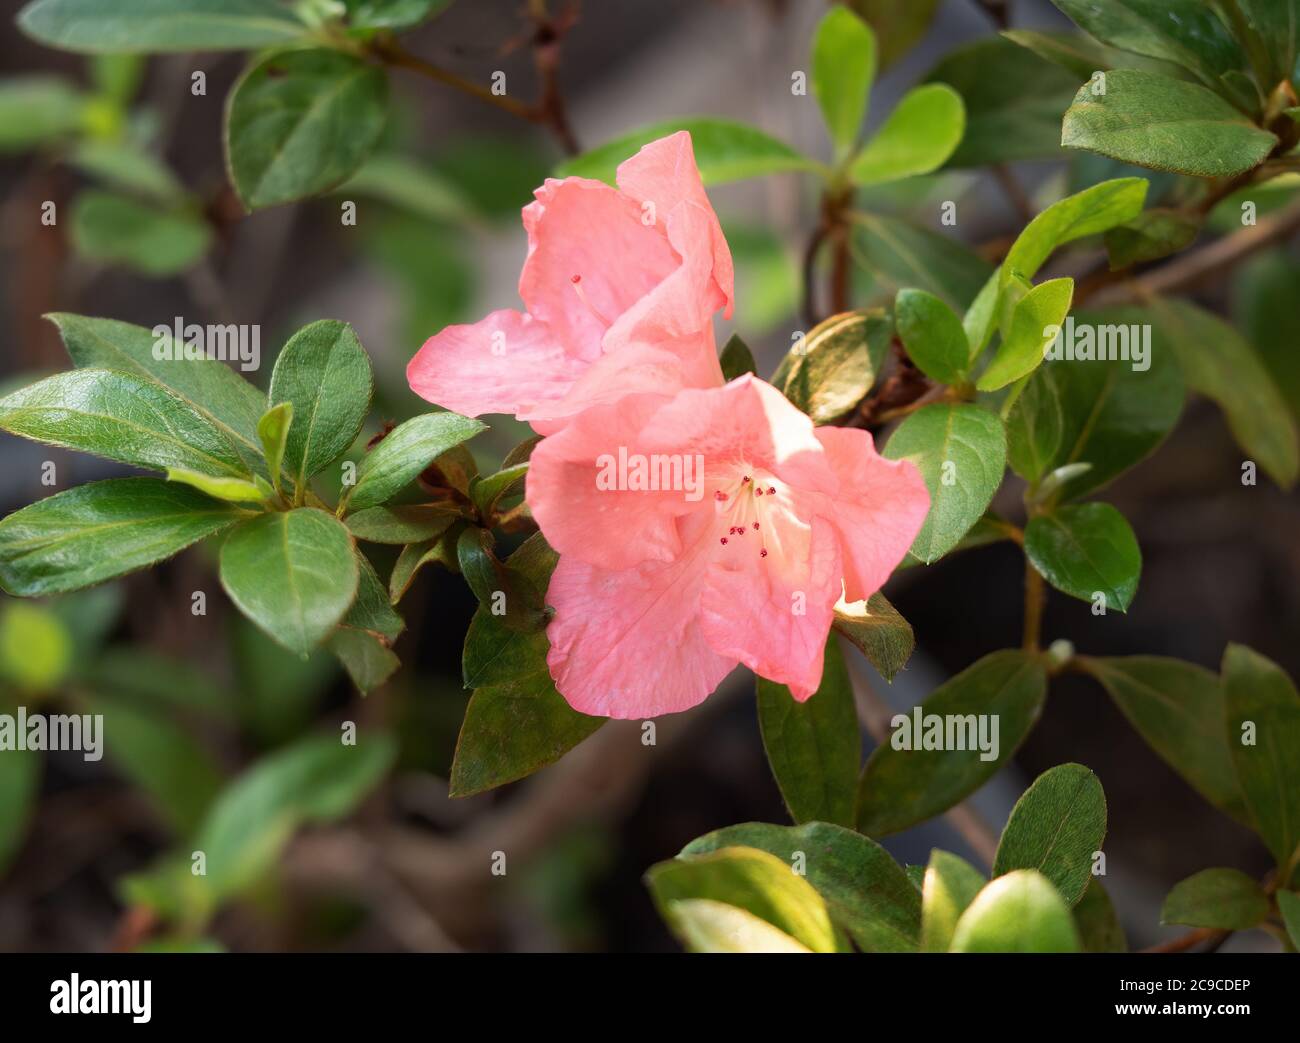 Closeup Pink Rhododendron Arboreum Flowers with Green Leaves Stock Photo